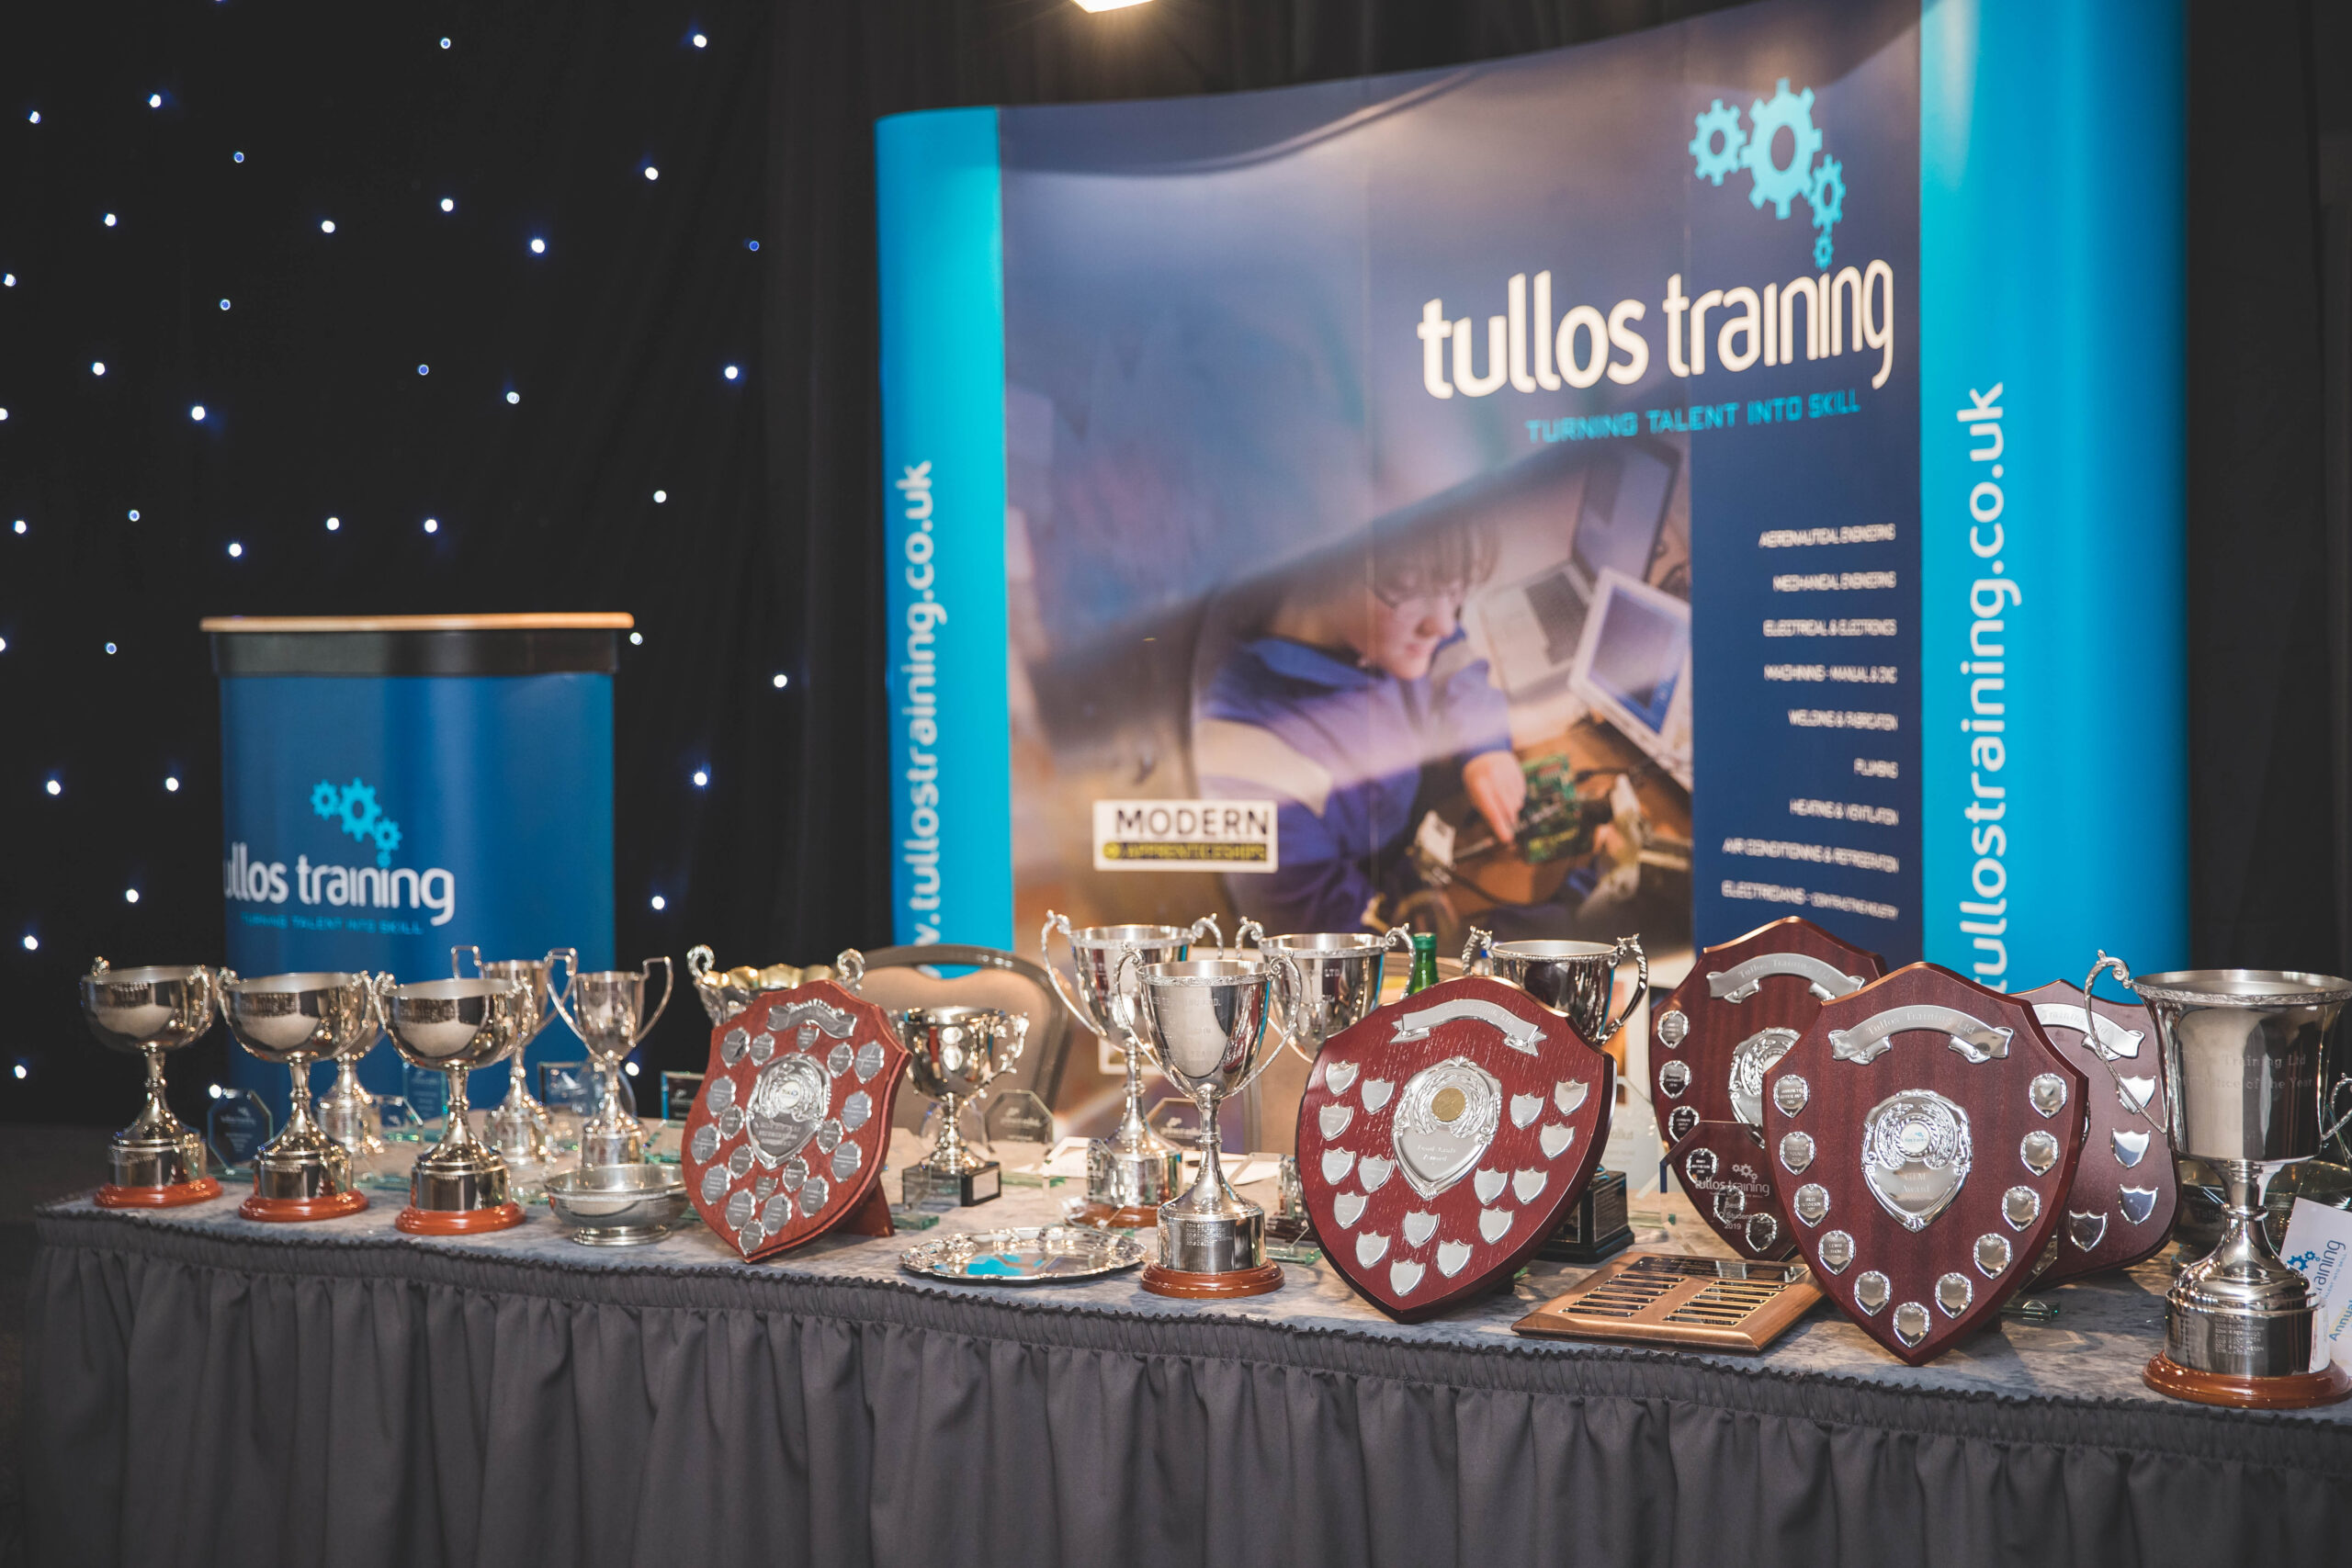 Image shows Tullos Training's Annual Awards displayed on a table with a black tablecloth in front of their branded banner and lectern with a black star cloth backdrop.